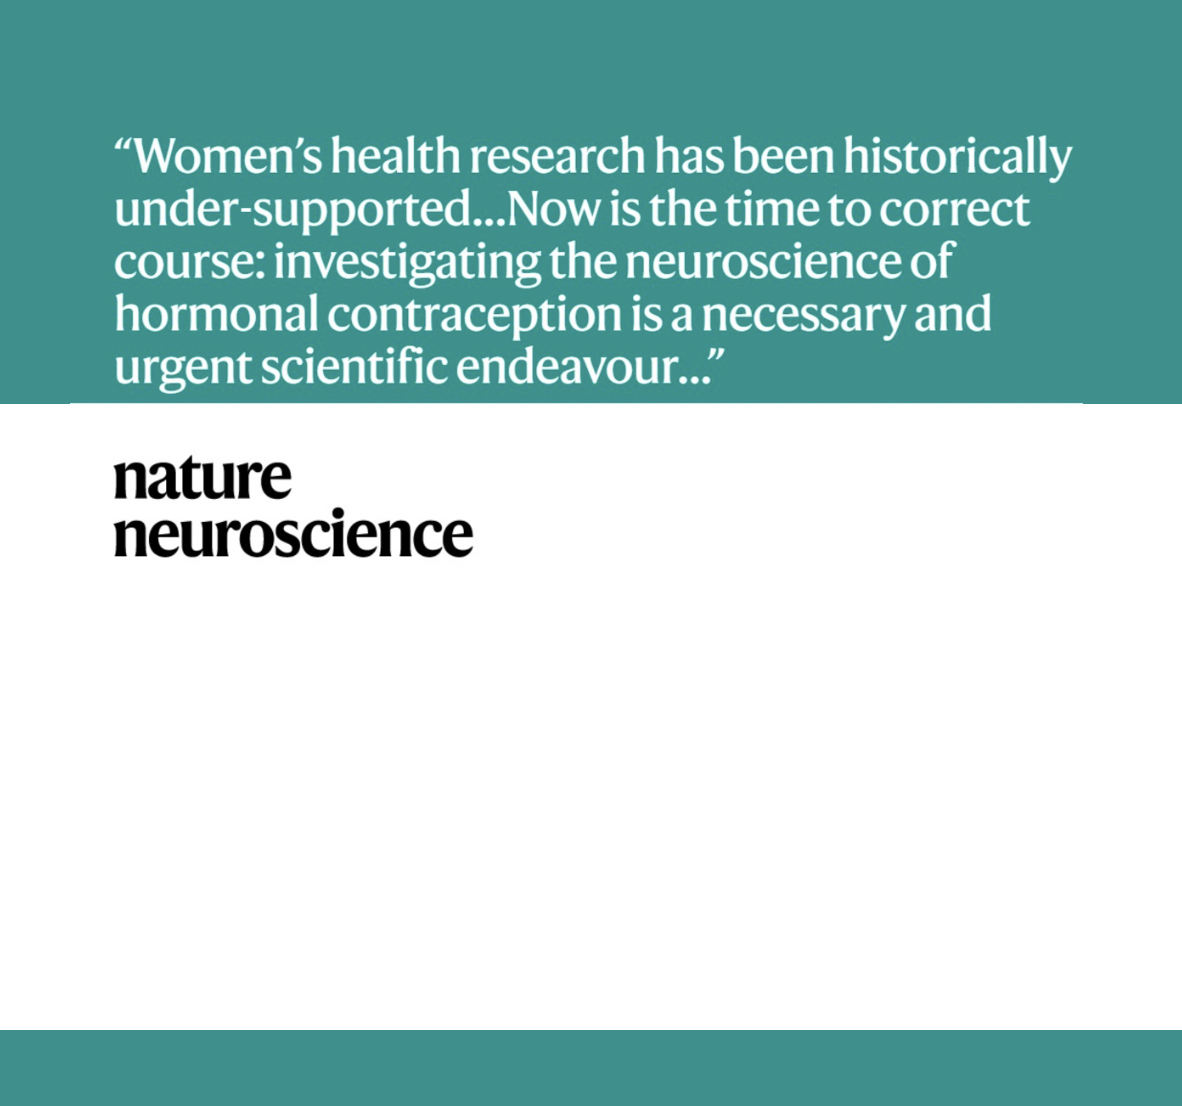 Perspective piece in Nature Neuroscience